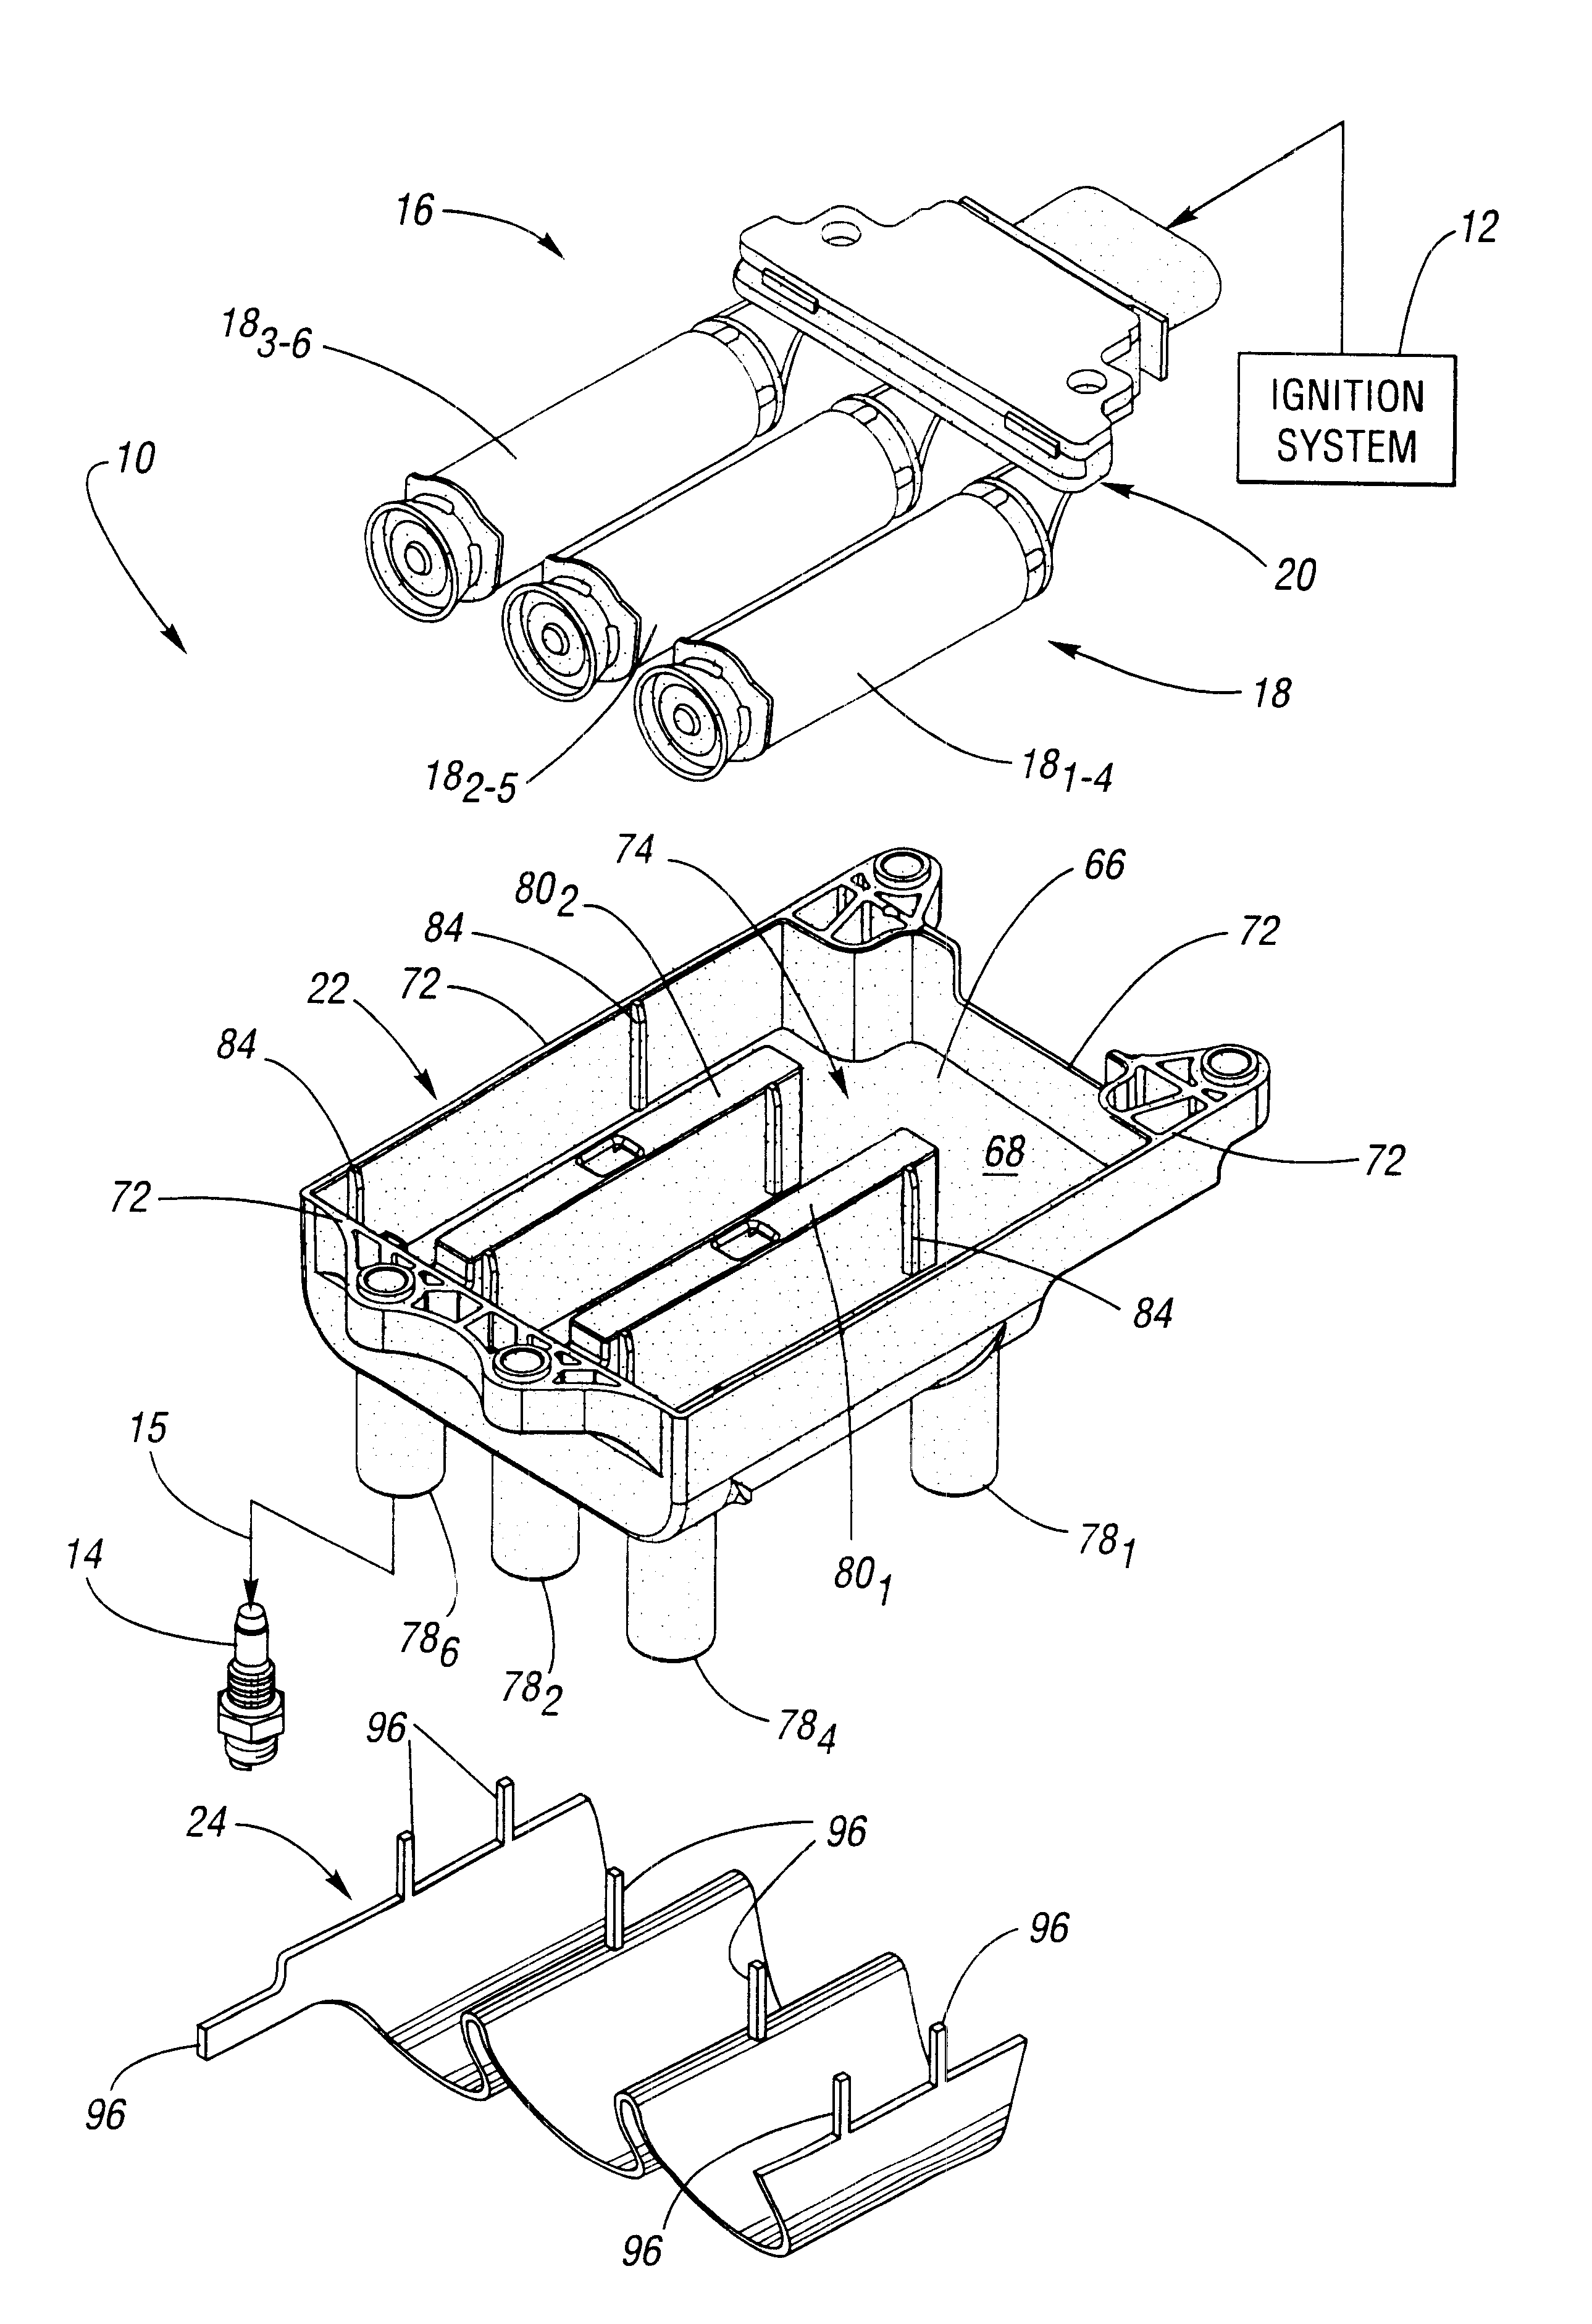 Separate mount ignition coil utilizing a progressive wound secondary winding